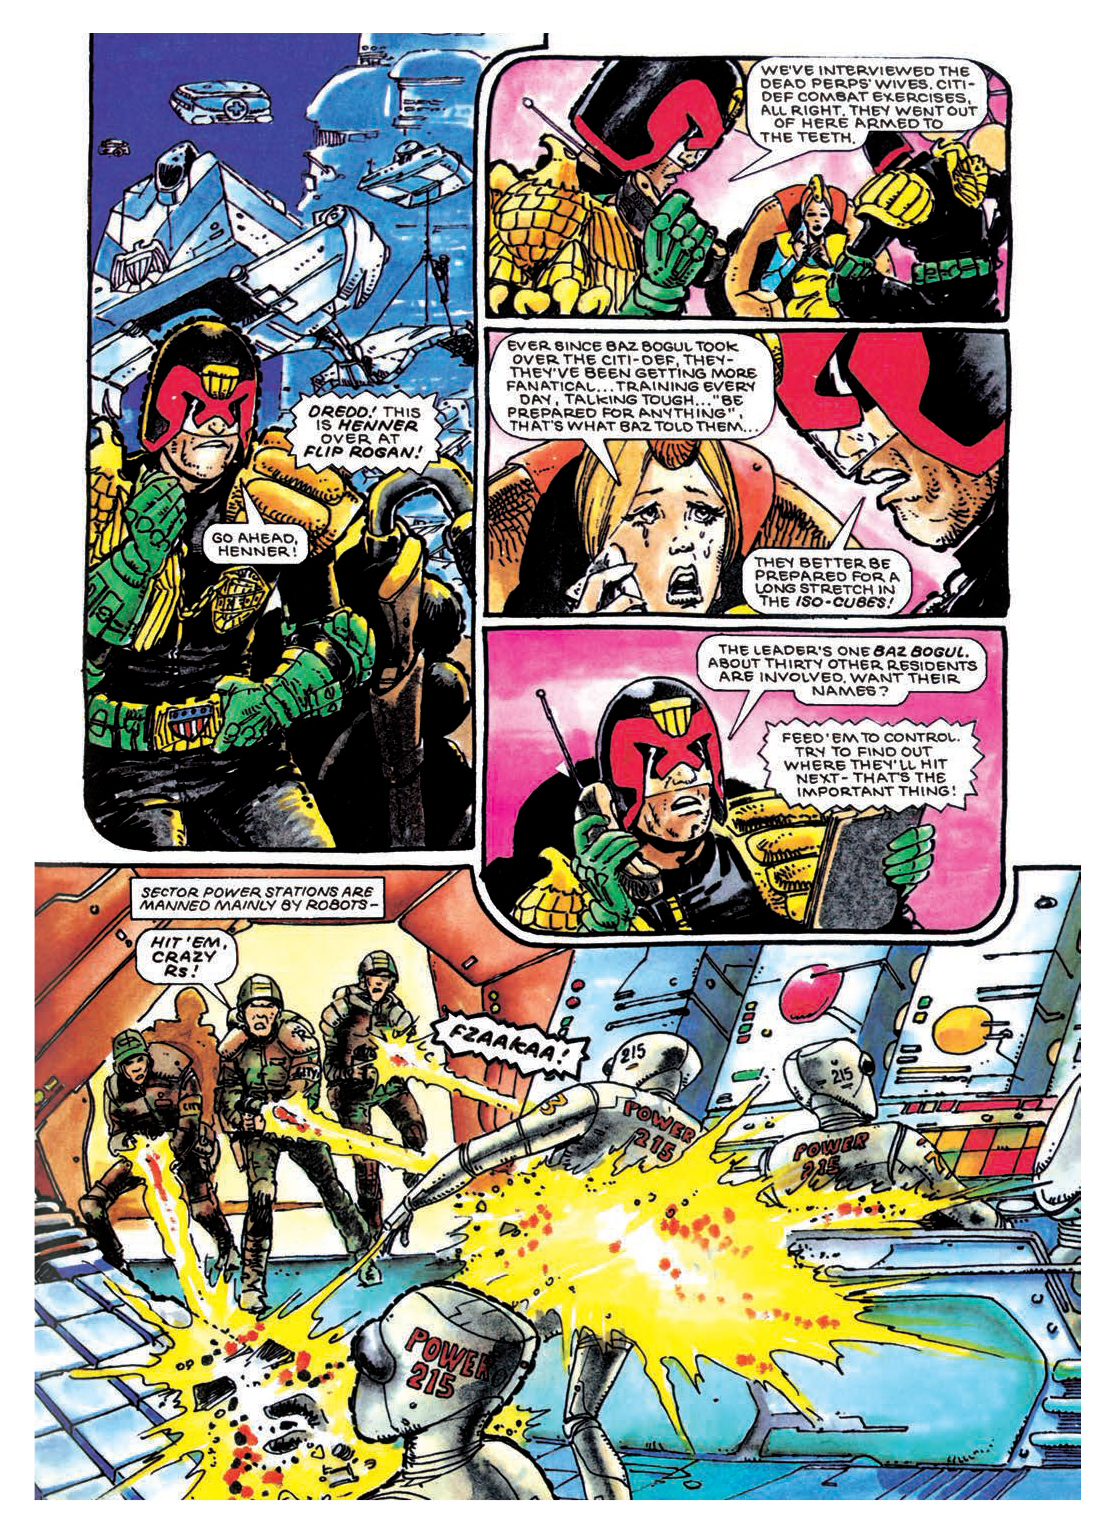 Read online Judge Dredd: The Restricted Files comic -  Issue # TPB 2 - 38